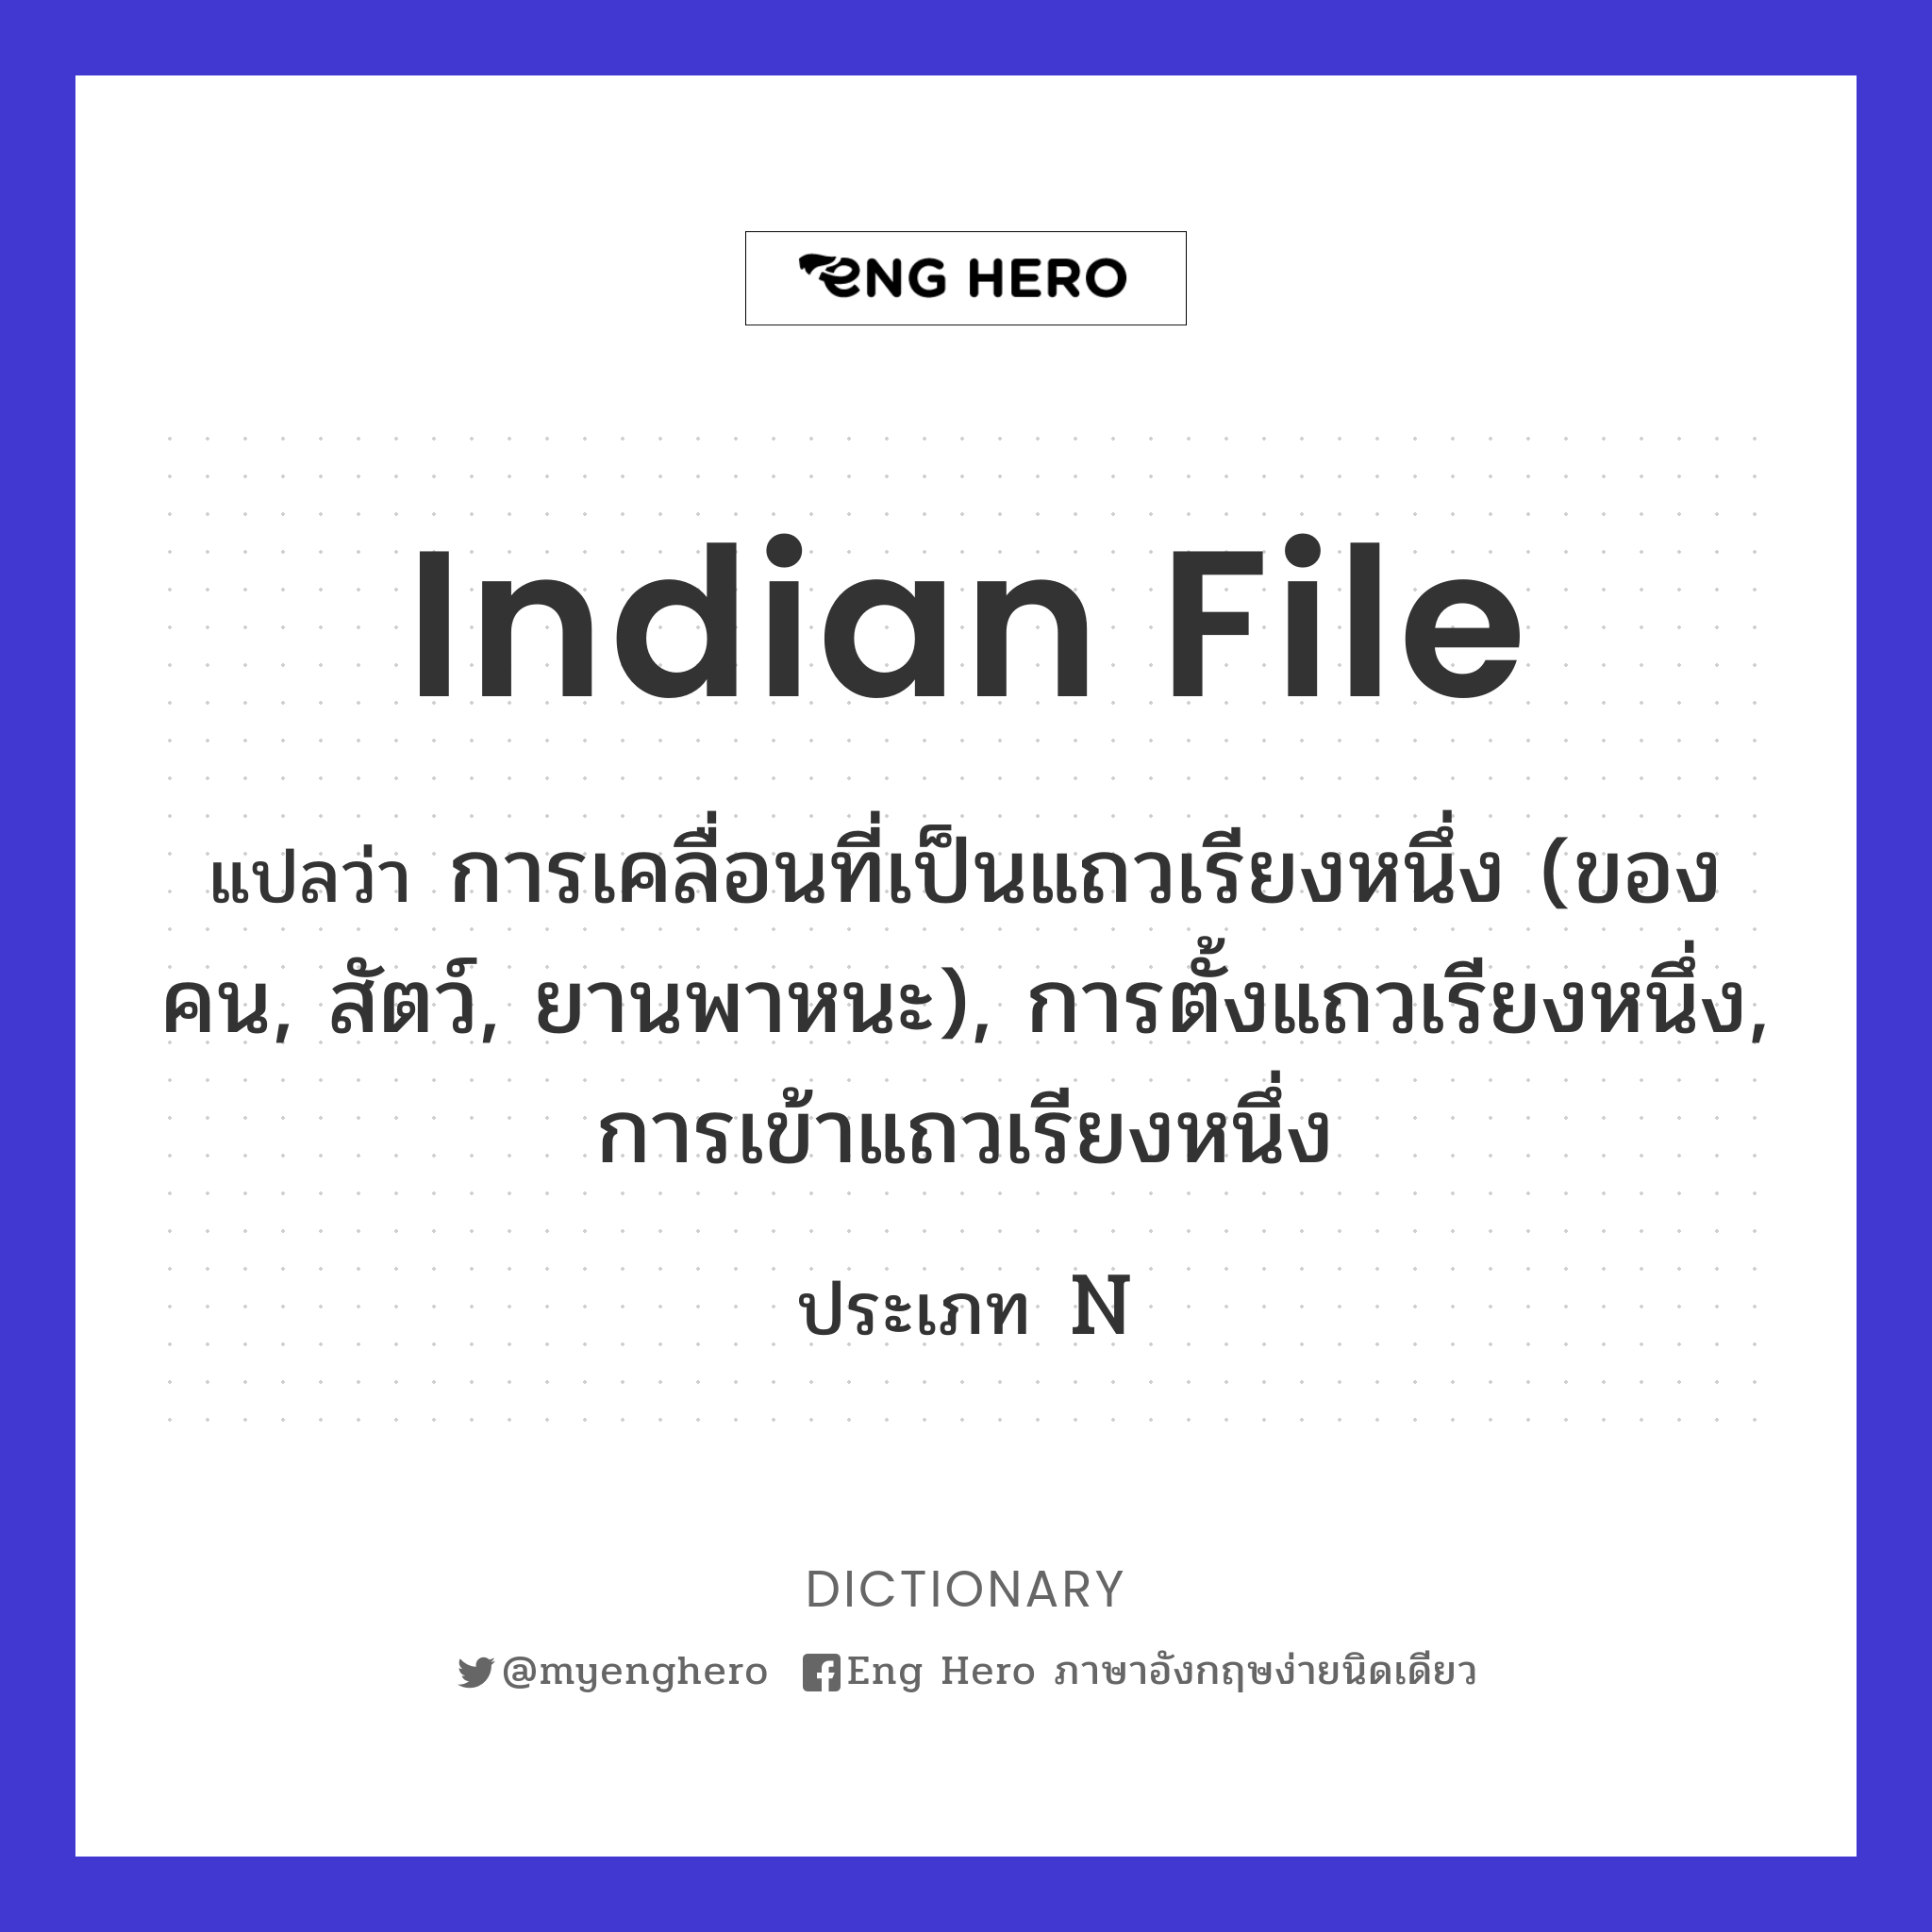 Indian file